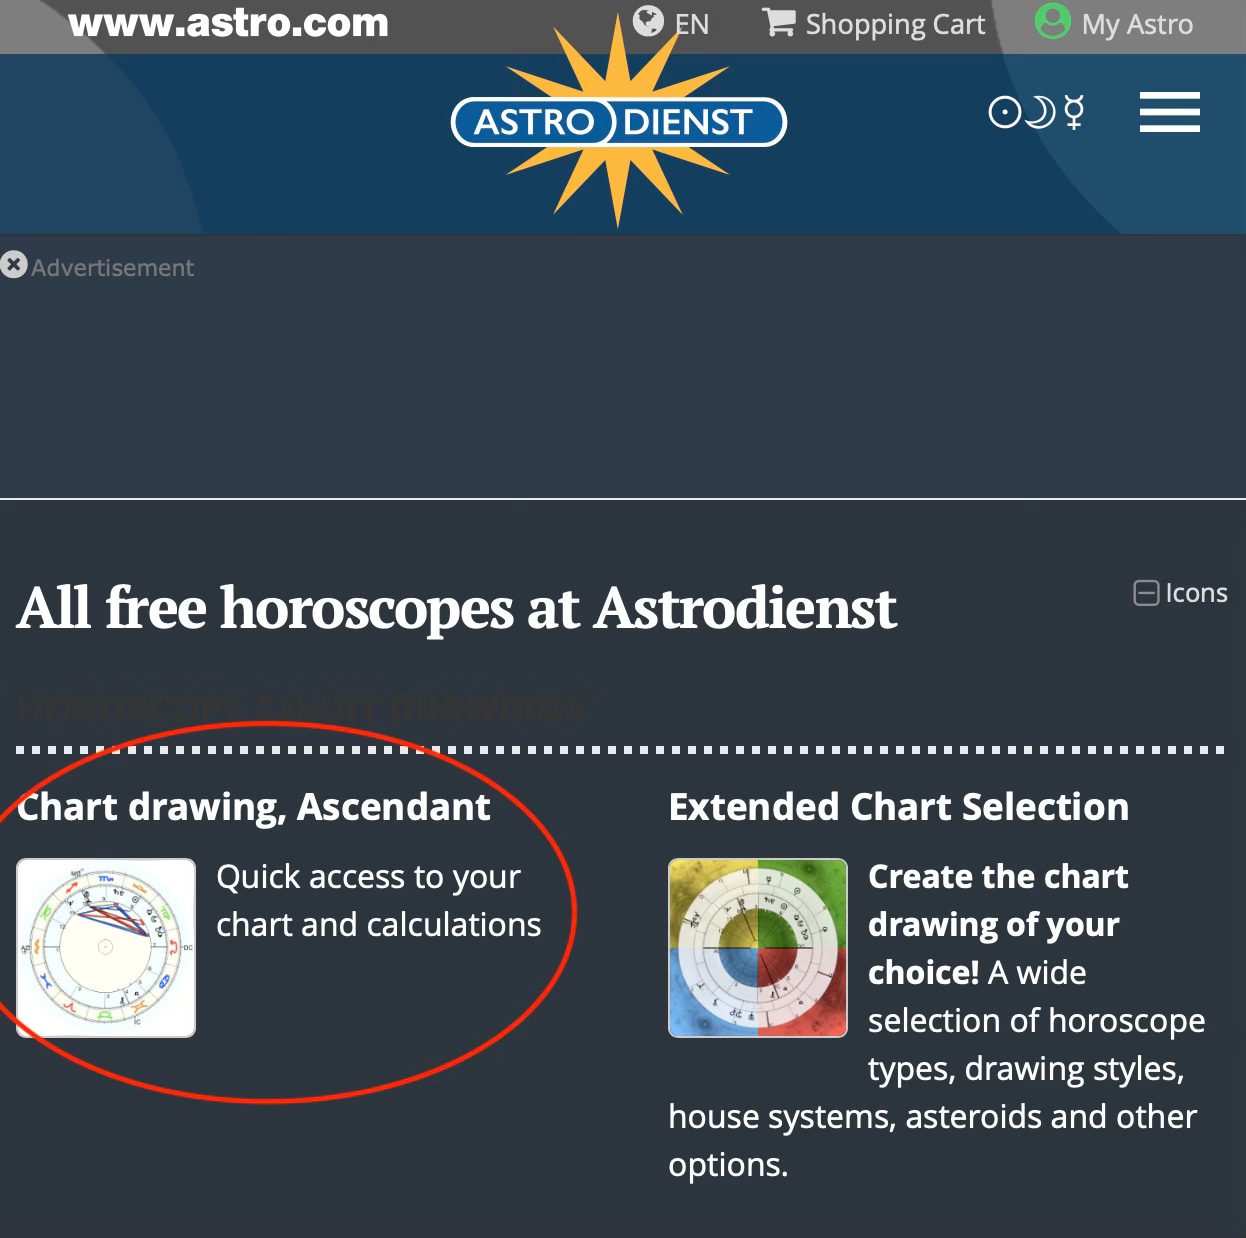 astro.com page with "Chart drawing, Ascendant" in a red circle